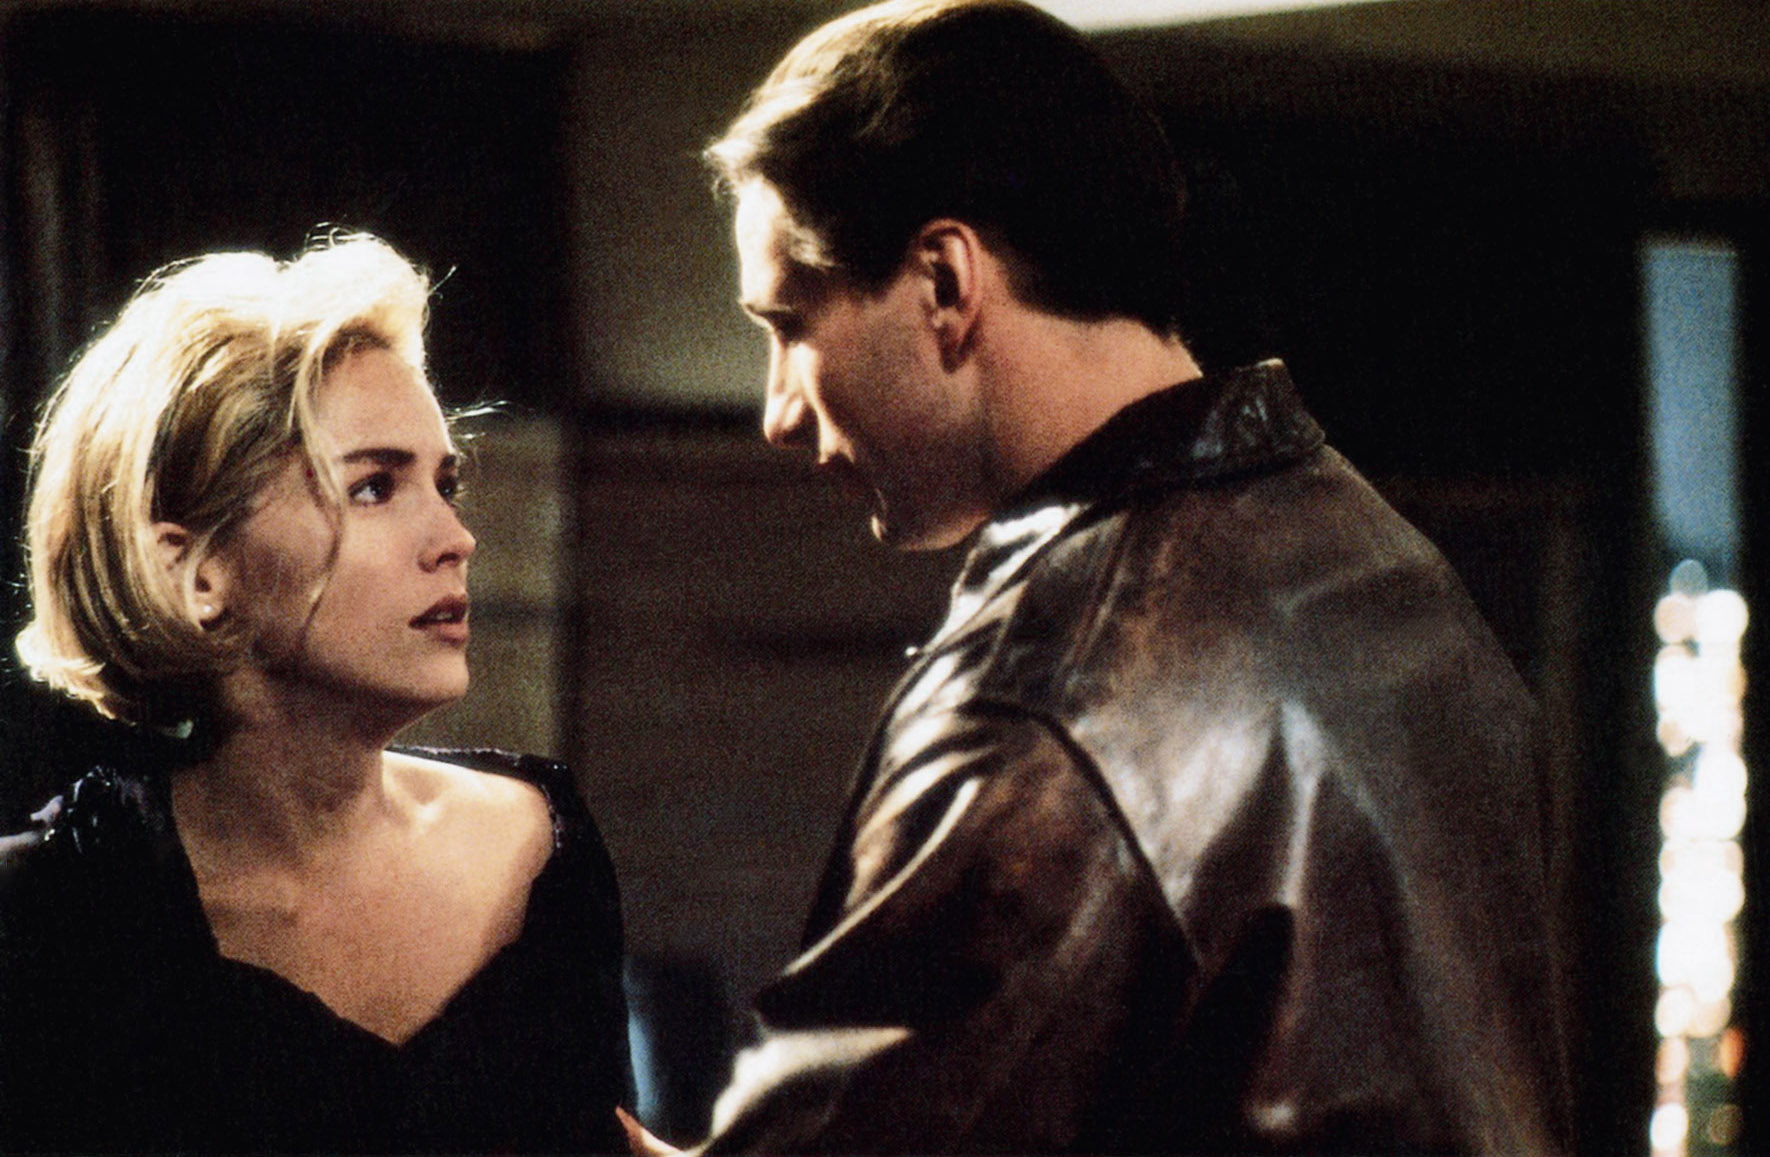 Sharon Stone and Billy Baldwin acting in "Sliver"